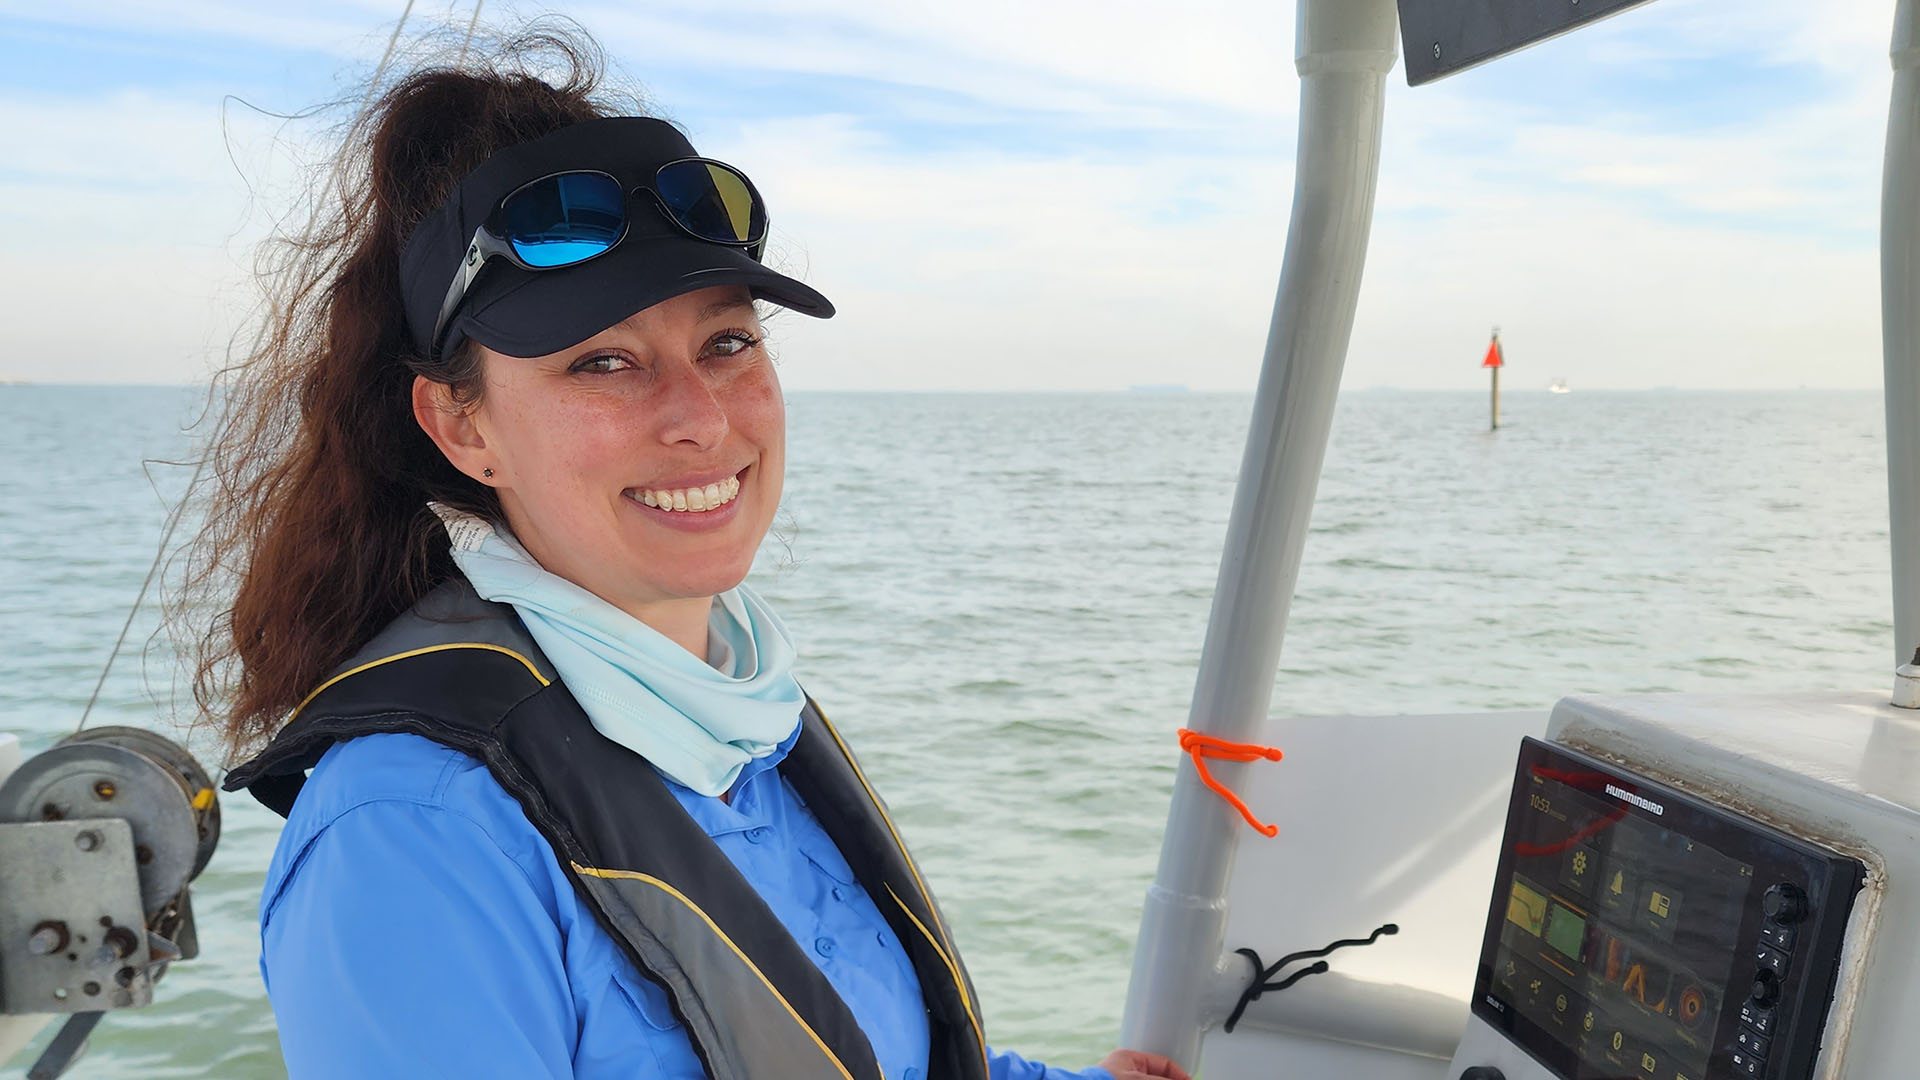 Sherah, smiling at the camera, is on a boat with the ocean horizon in the background.